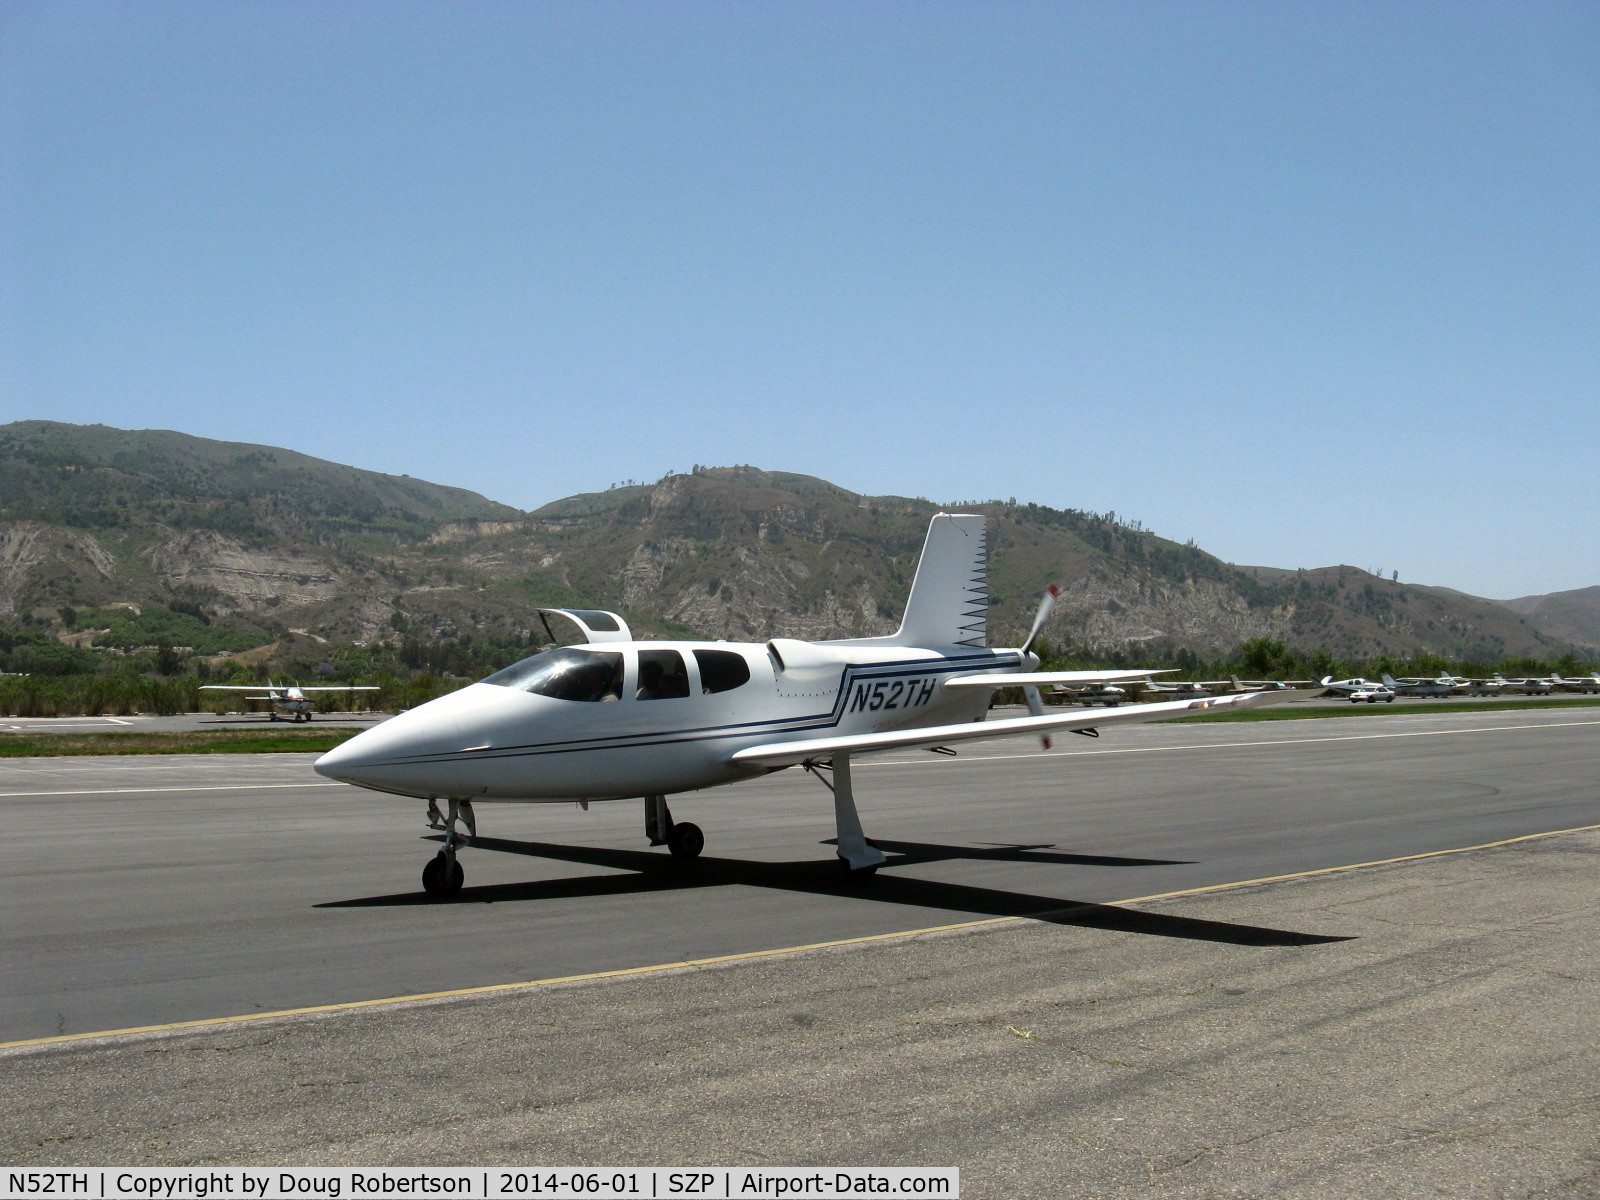 N52TH, 1999 Cirrus VK-30 C/N 143, 1999 Hastings Cirrus Design VK-30, Continental IO-550 300 Hp, tri-blade pusher prop, trailing link main gear, retractable tri-gear, Experimental class, see aloft in DVD 'One Six Right'. Taxi back after landing Rwy 22